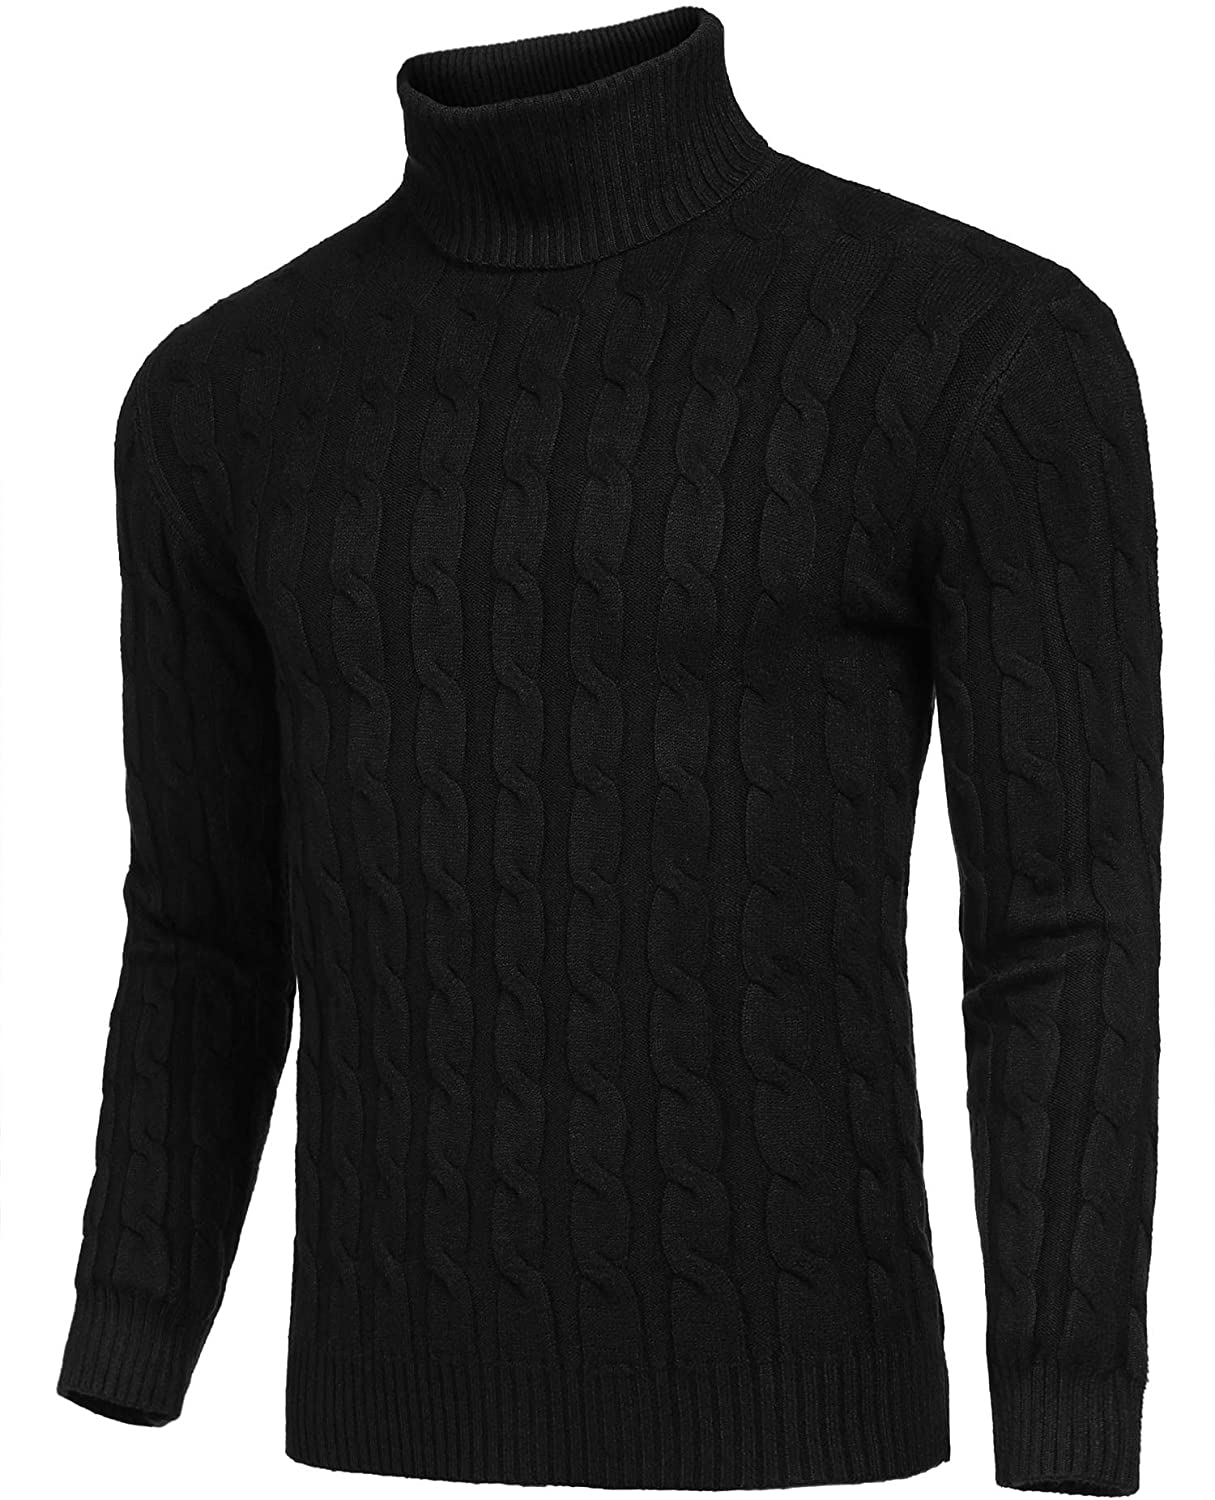 JINIDU Men's Turtleneck Sweater Slim Fit Casual Knitted Twisted Pullover Solid Sweaters 